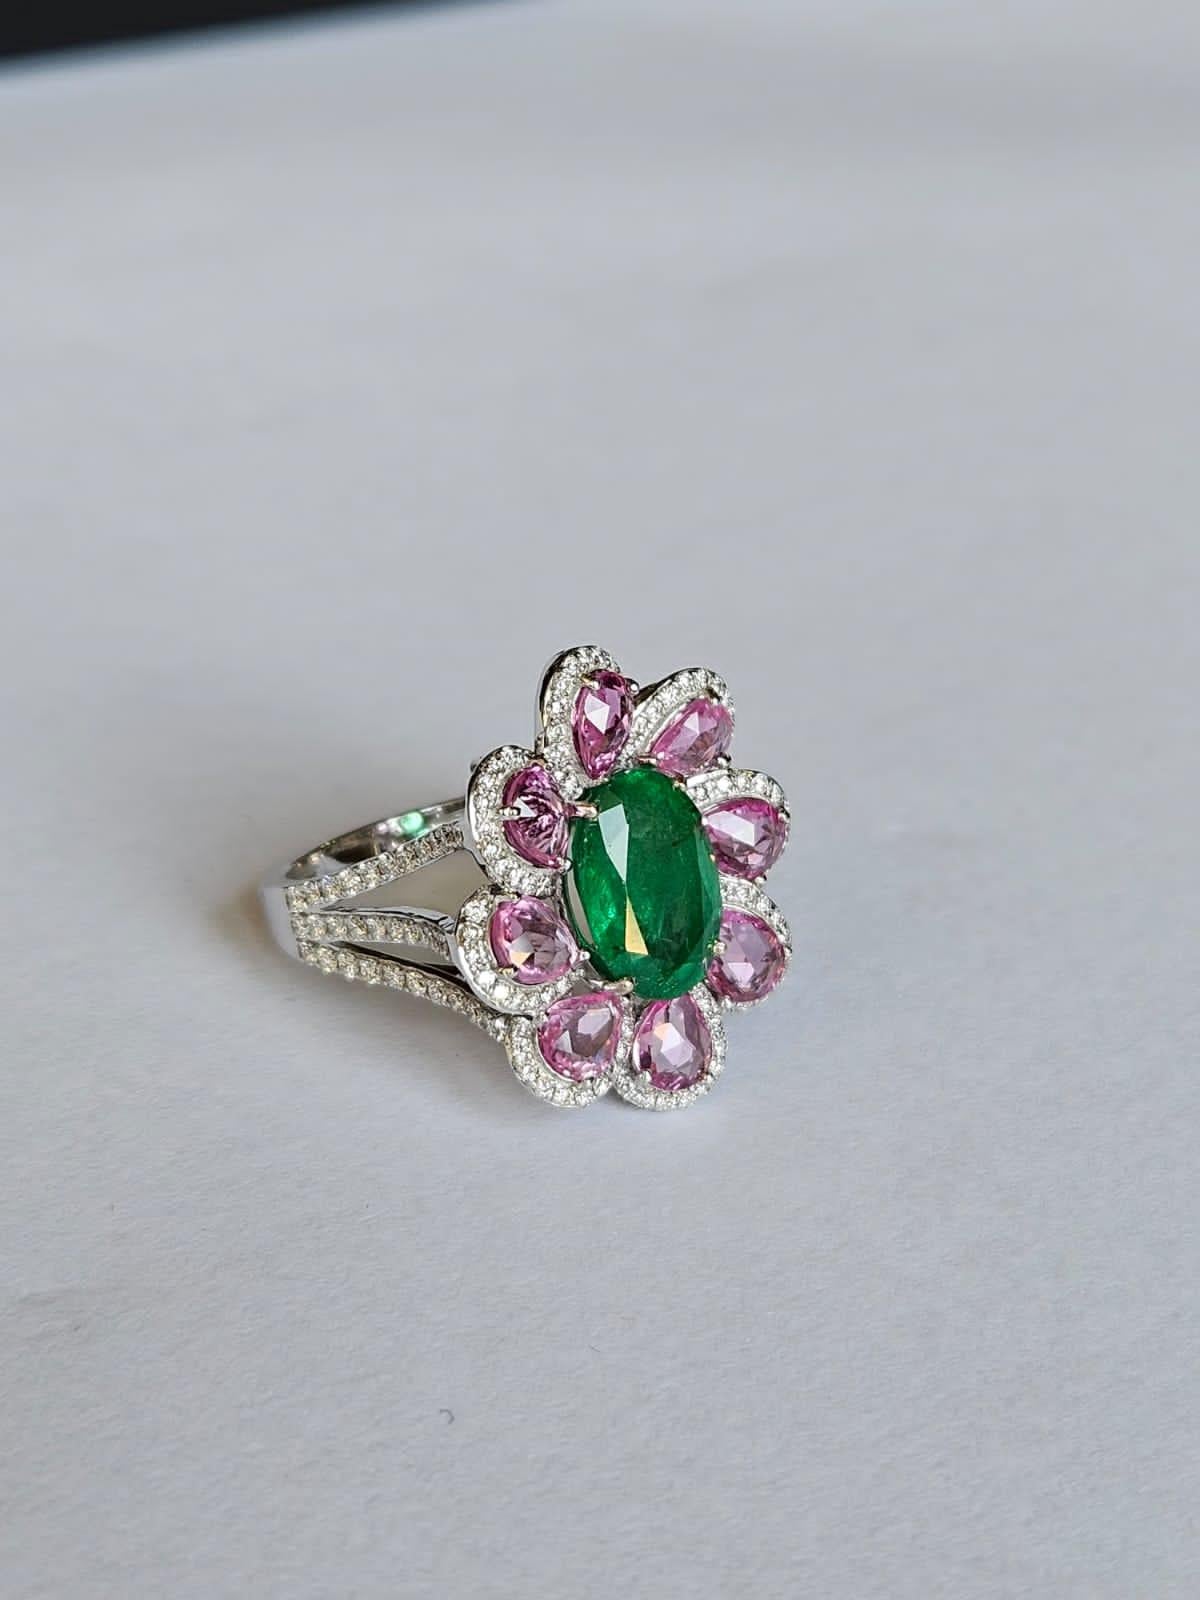 Oval Cut Set in 18K Gold, natural Zambian Emerald, Pink Sapphire & Diamonds Cocktail Ring